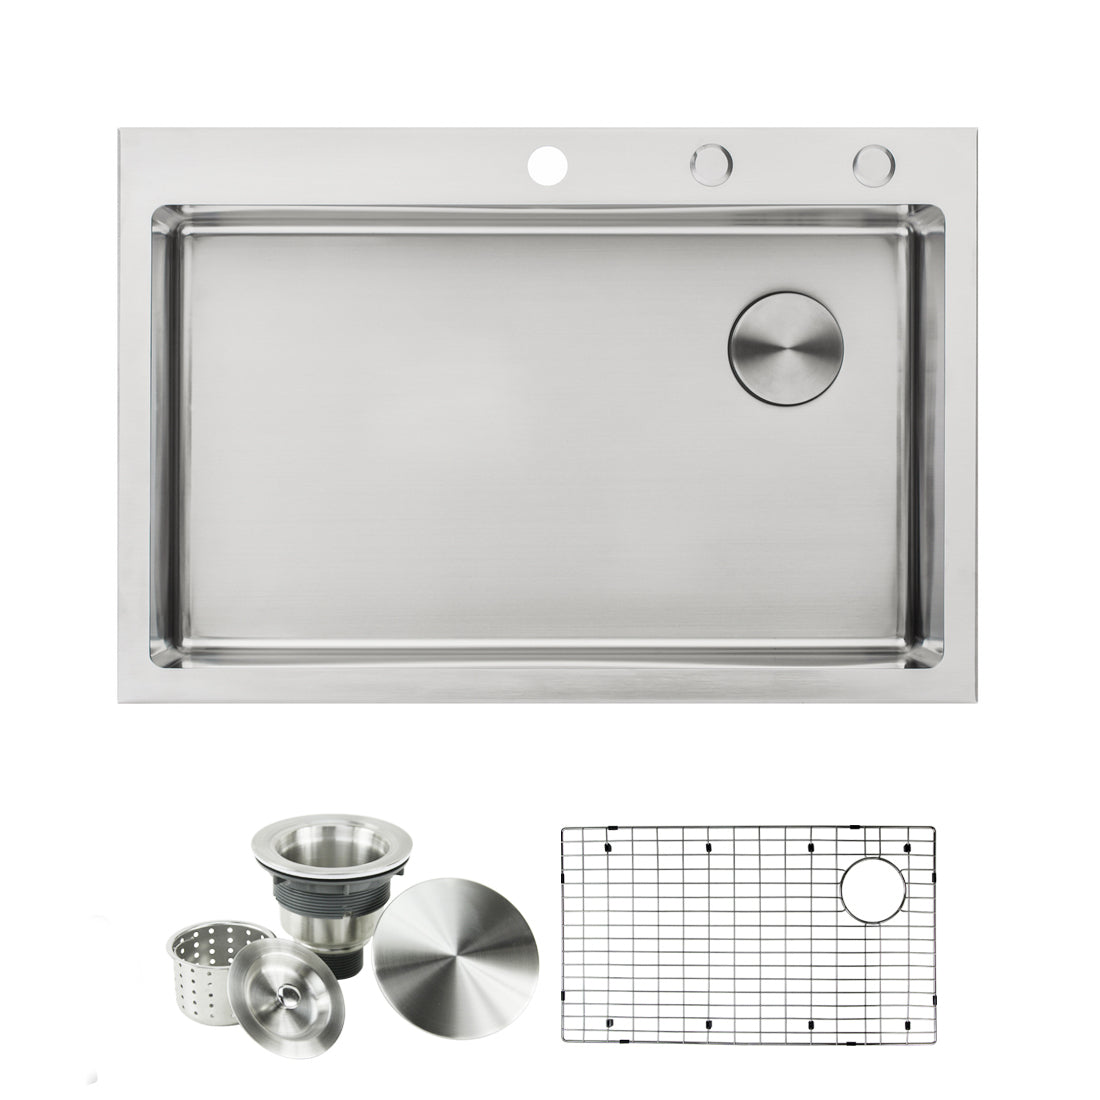 Offset Drain Opening Drop-In / Topmount 16 Gauge Stainless Steel Single Bowl Kitchen Sink 15mm Tight Radius Includes Bottom Protective Grid & Strainer